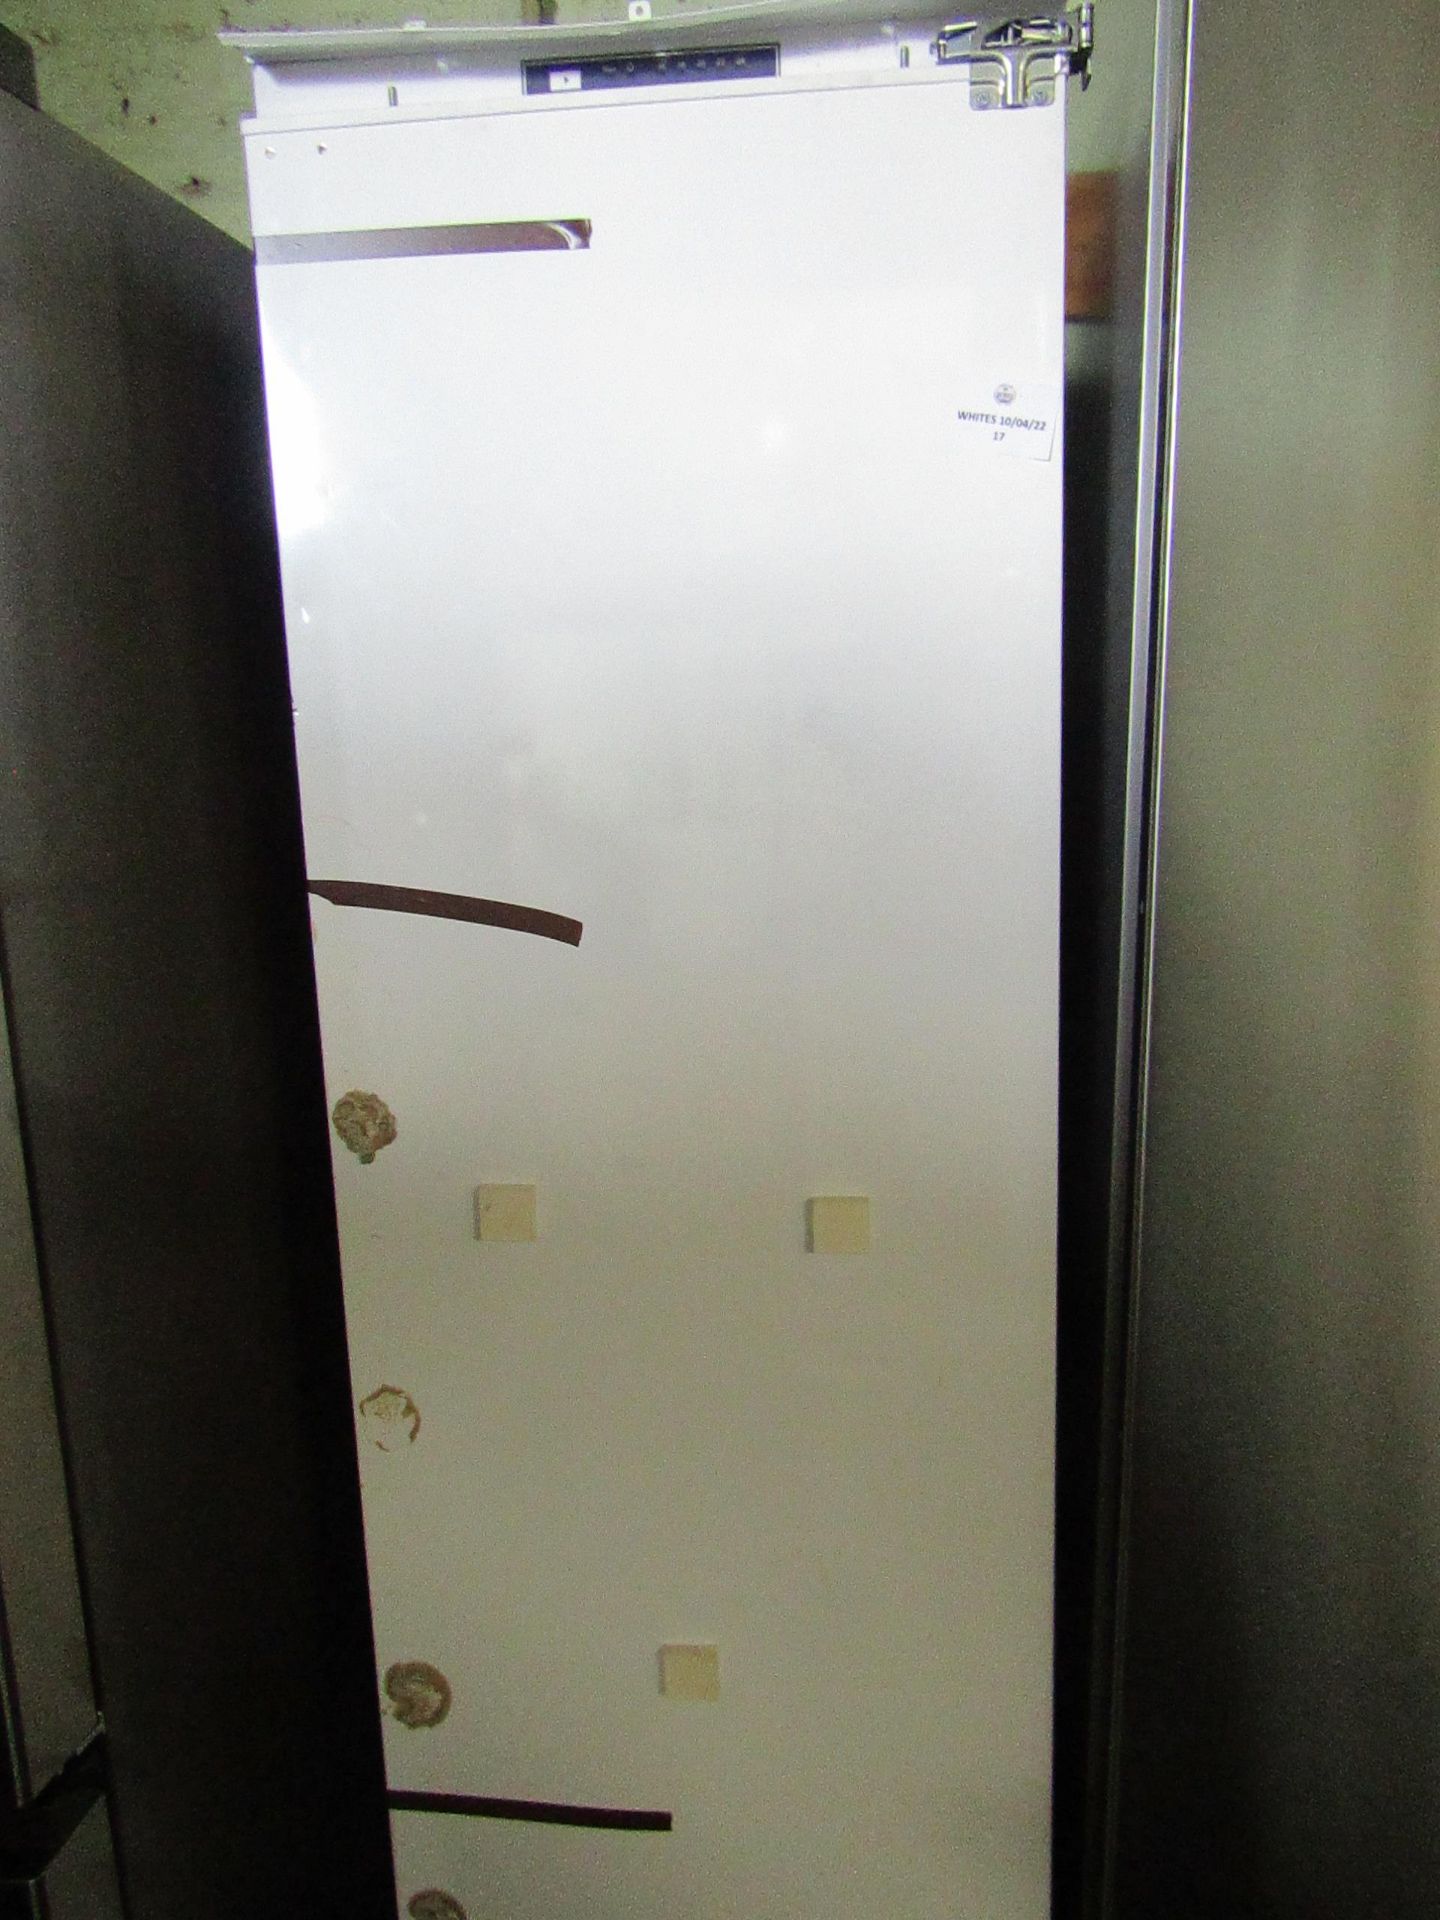 Unbranded - Intergrated Tall White Freezer ( No Front Panel - Hide Behind Cupboard Doors Etc ) -